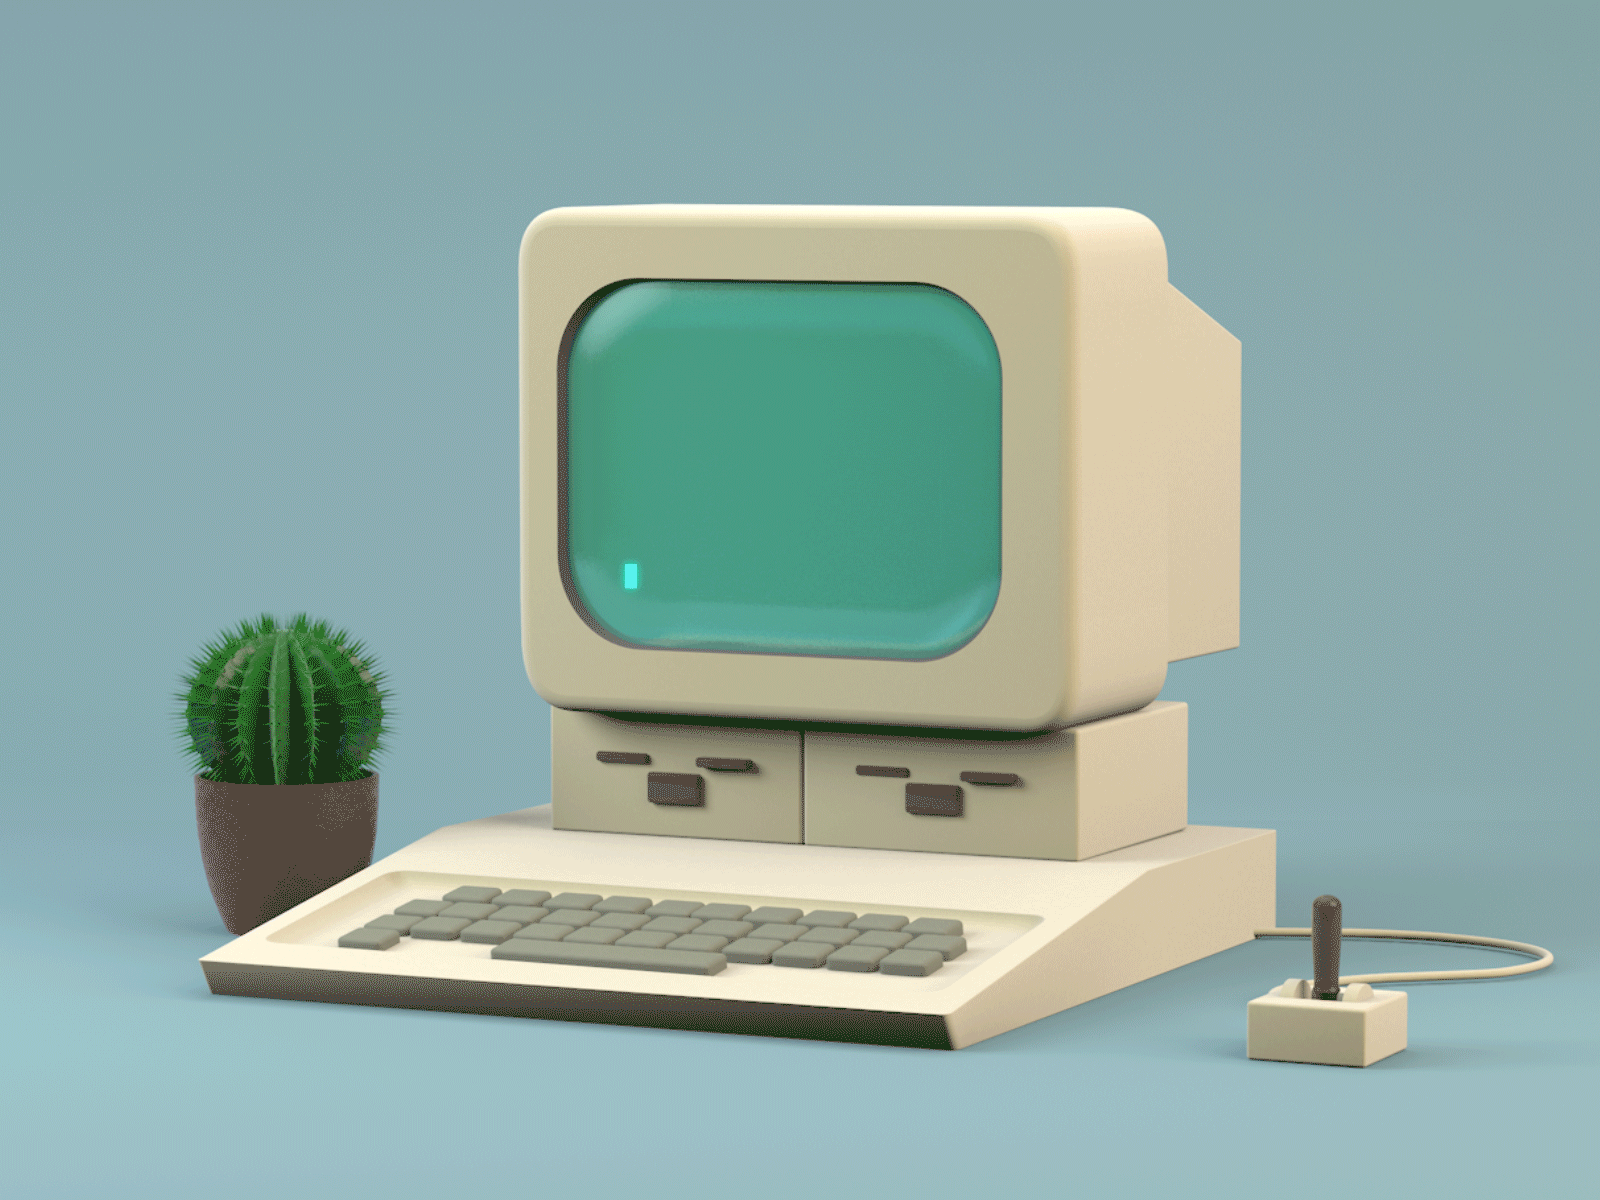 Old computer